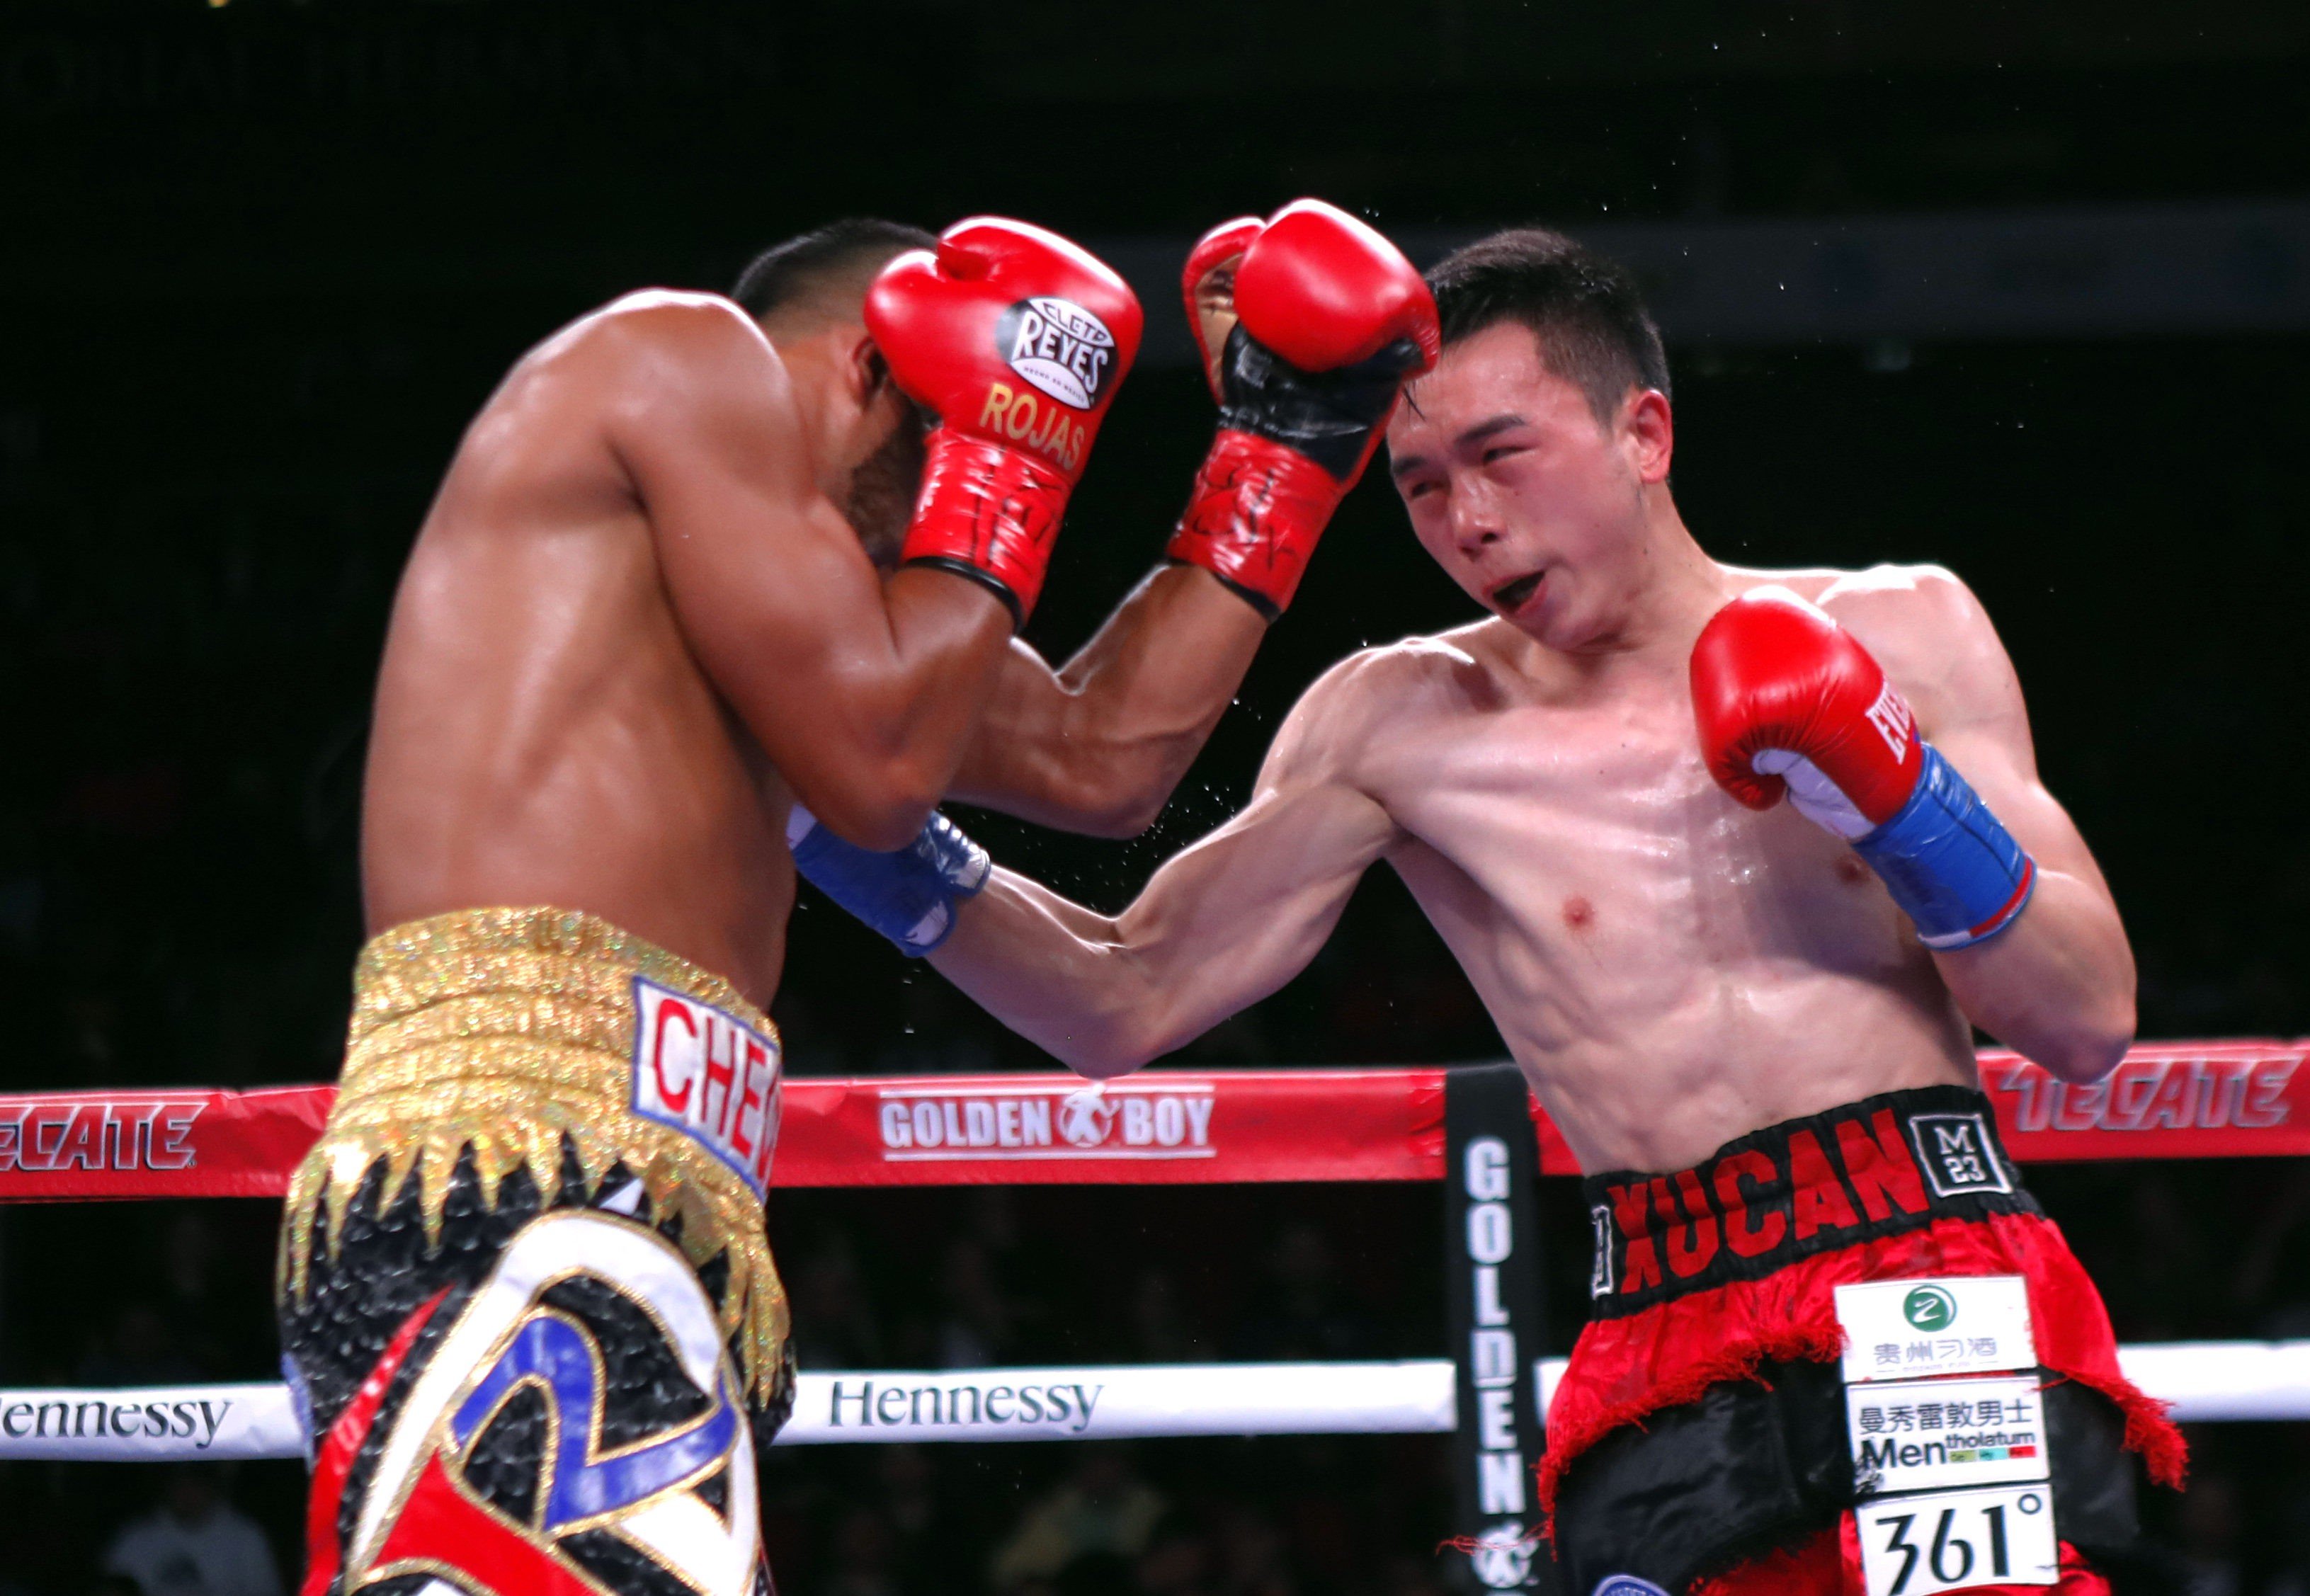 China’s Xu Can (right) on his way to victory against Puerto Rico’s Jesus Rojas for the WBA featherweight title in Houston, Texas in January. Photo: Xinhua